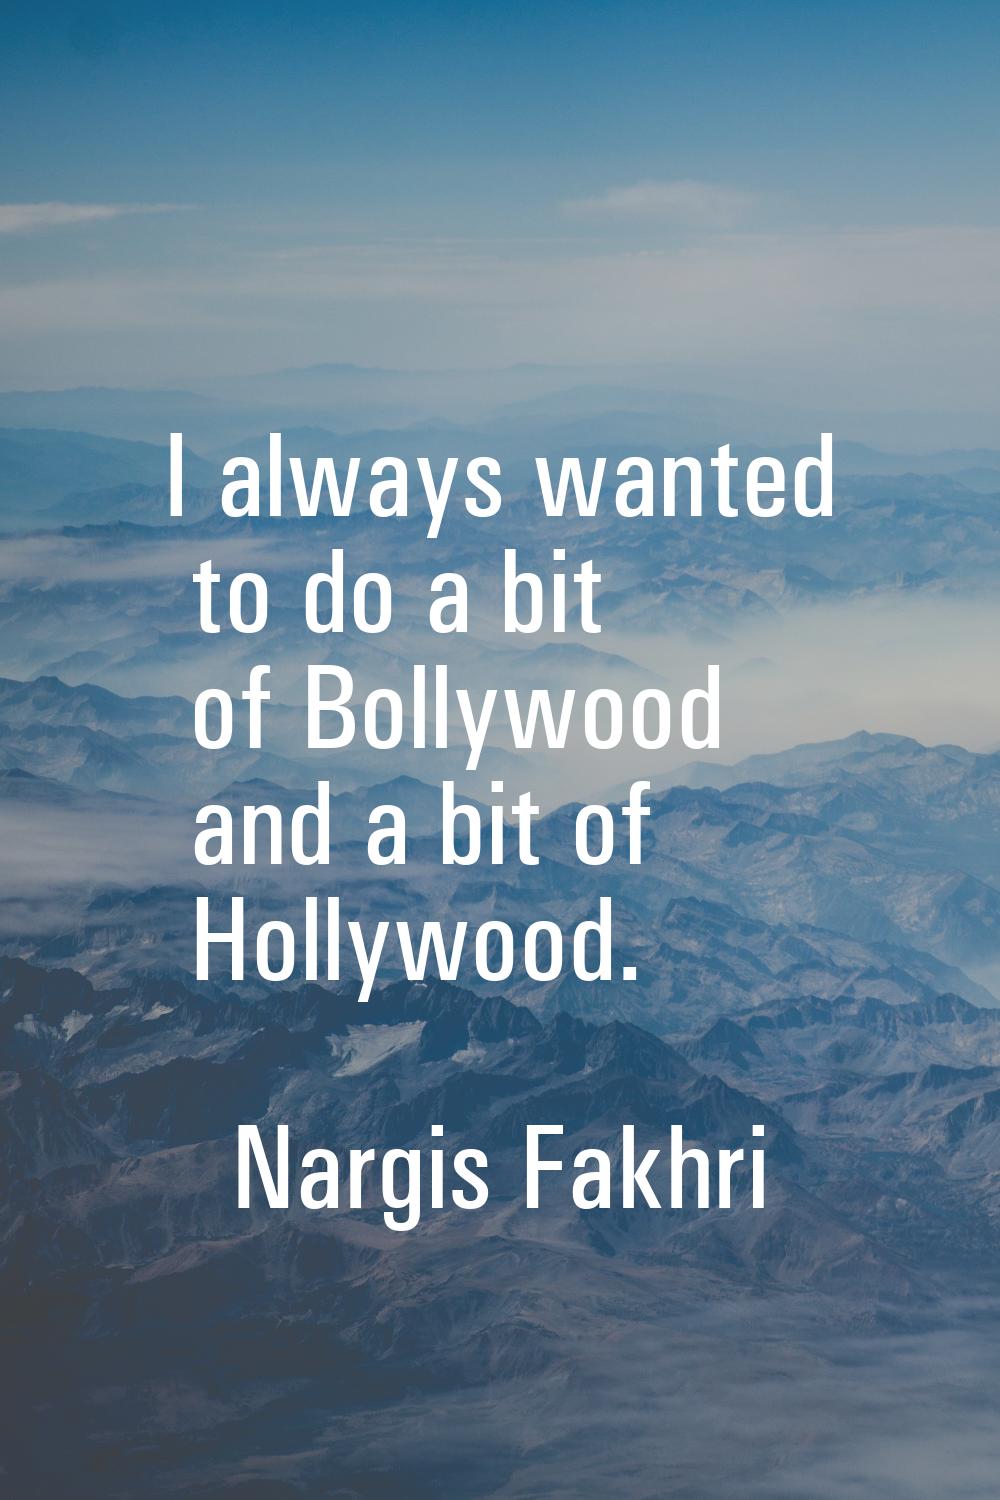 I always wanted to do a bit of Bollywood and a bit of Hollywood.